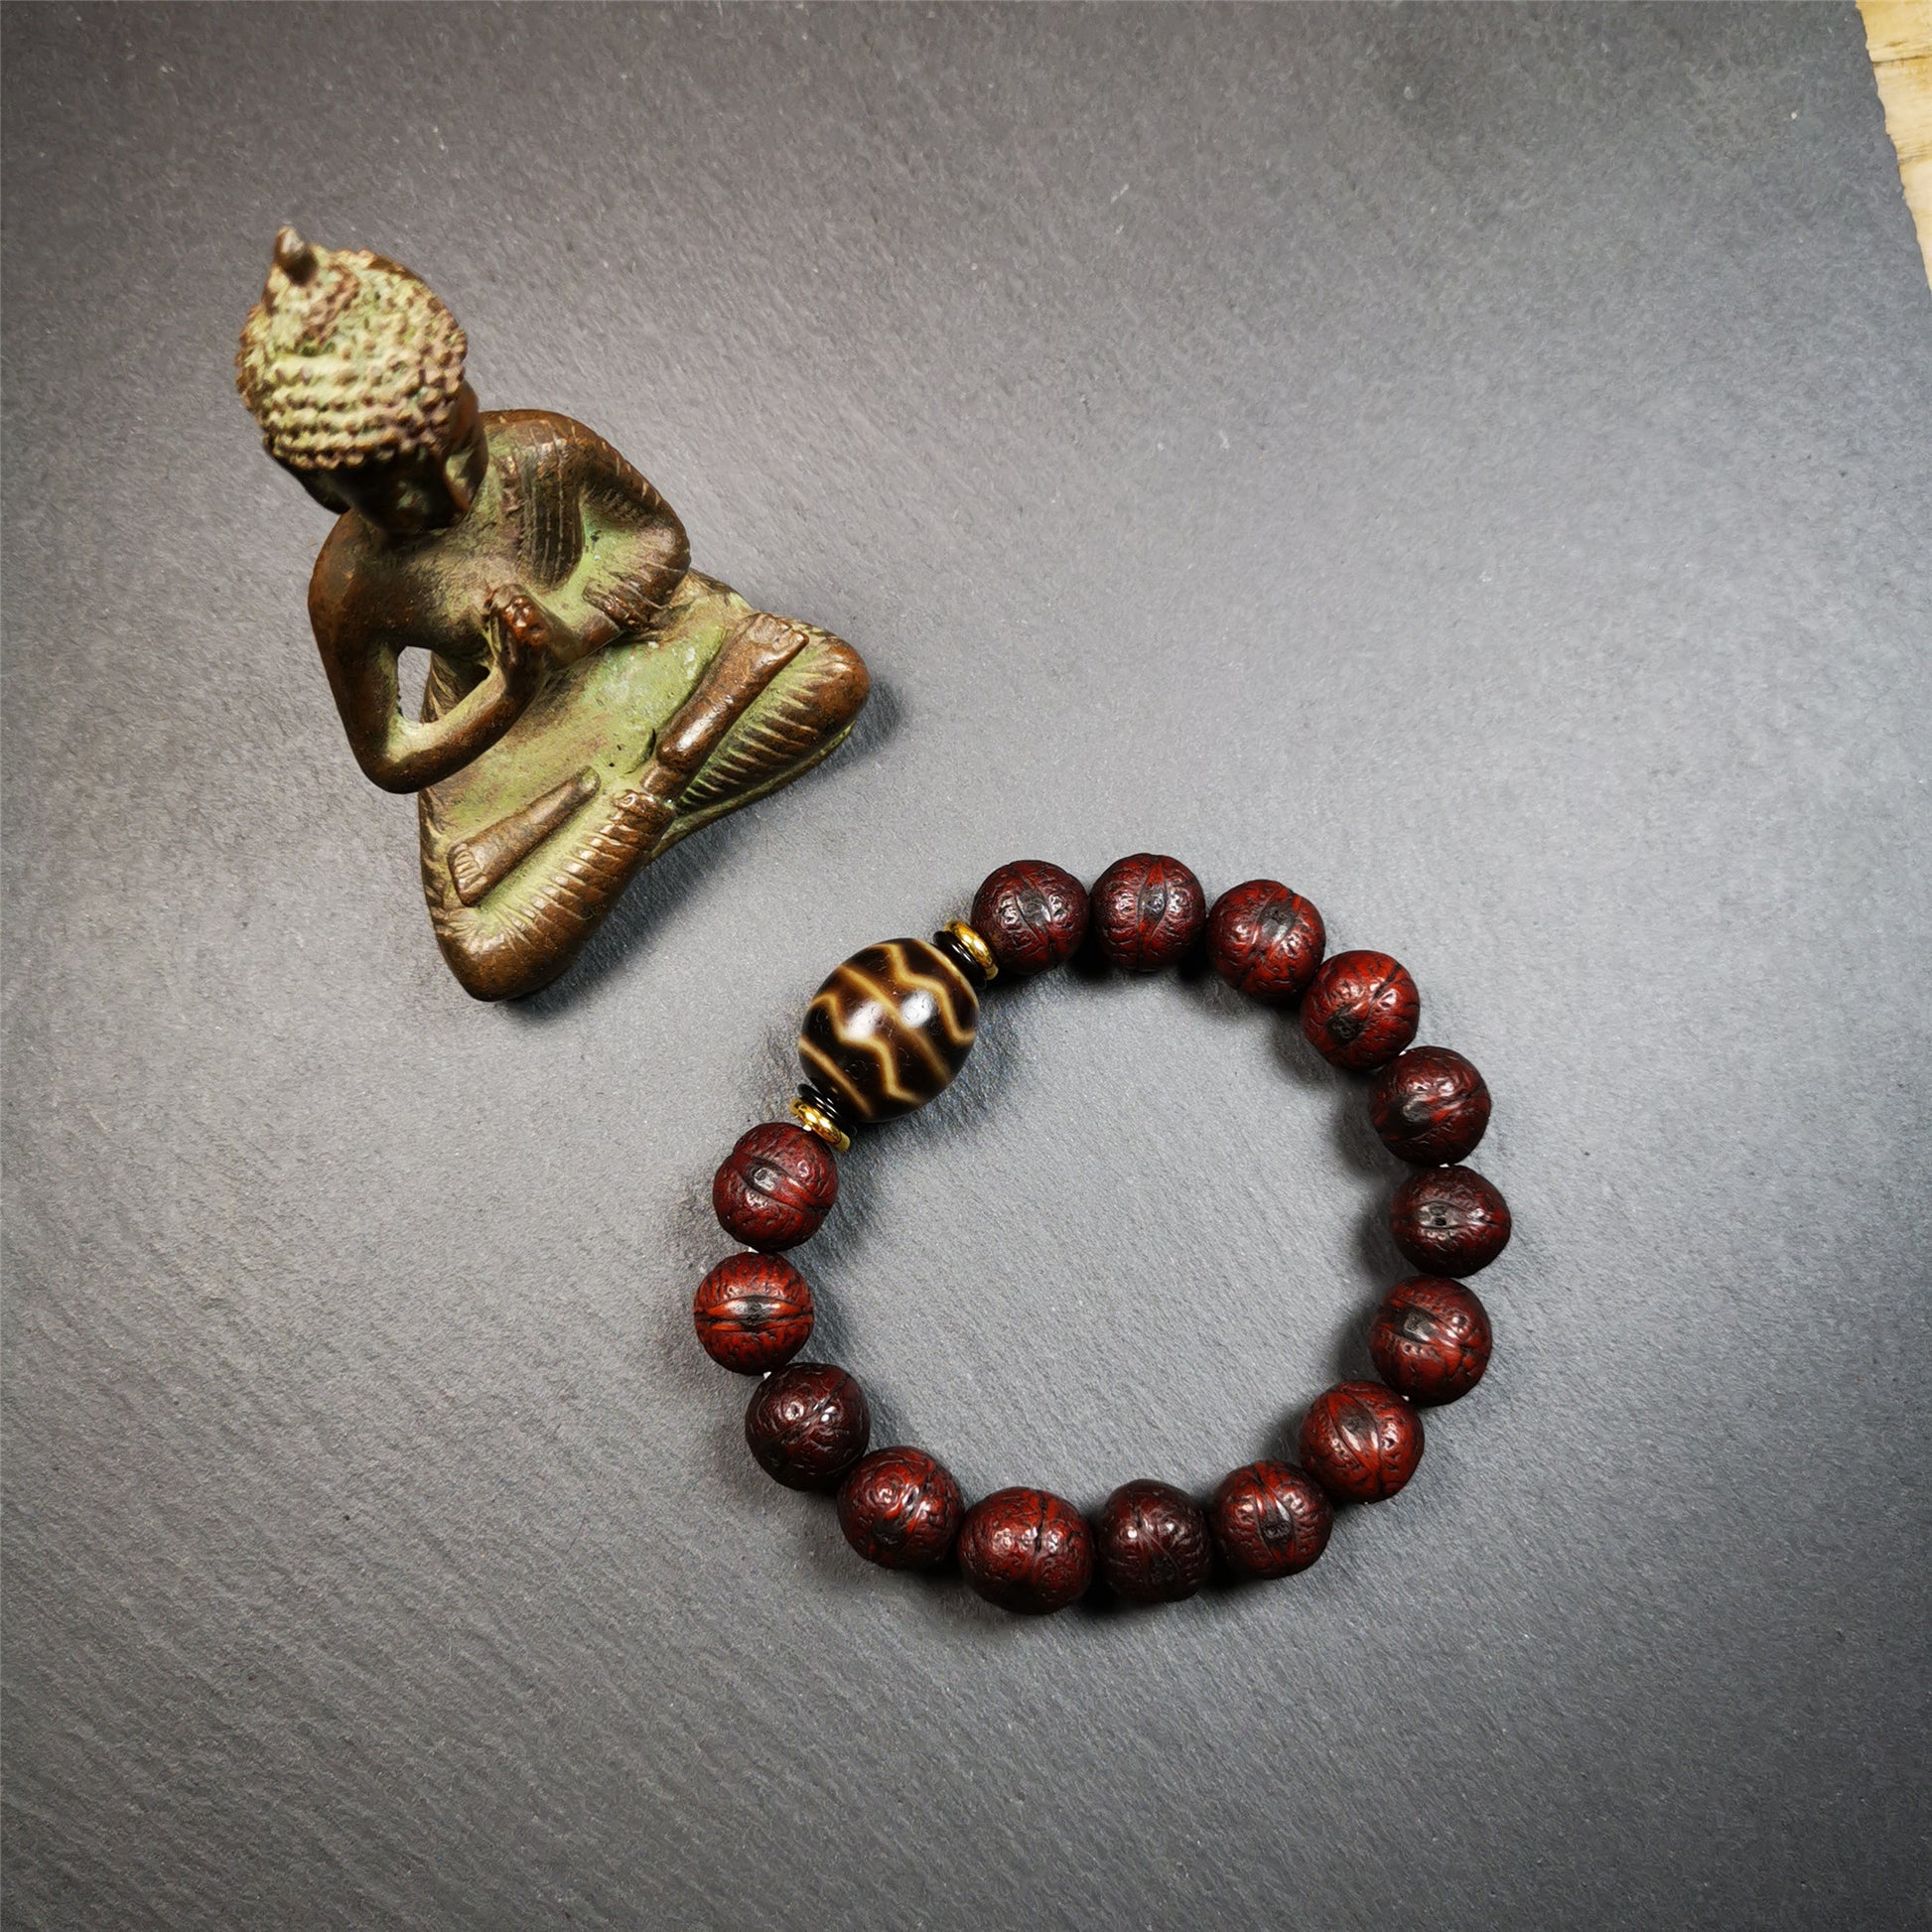 This unique Dalo Dzi bracelet combines the mysterious and unique qualities of the Fortune Wave dalo dzi and 15 old bodhi seed beads,giving it a distinct feel. It is brown in color and has a circumference of approximately 7 inches, suitable for most wrist sizes.